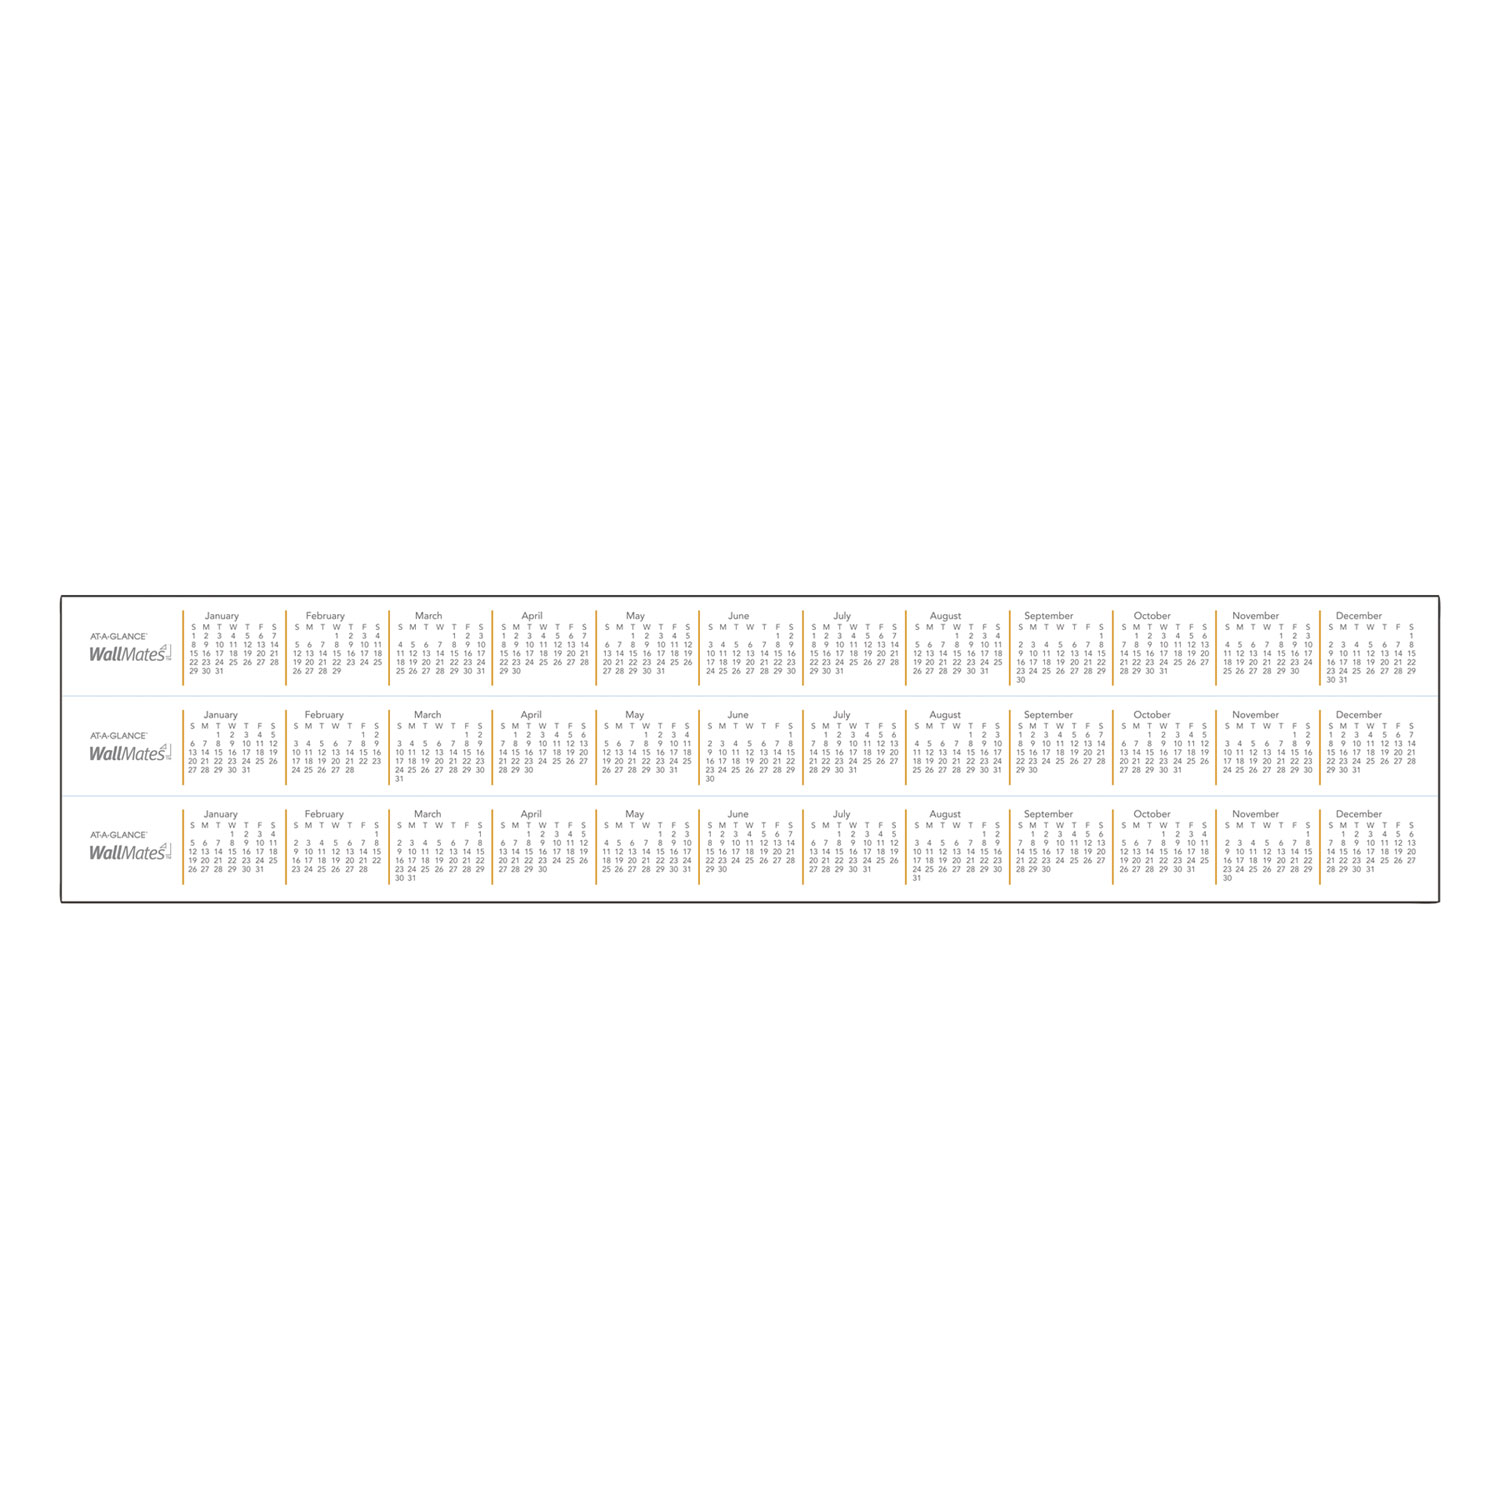 AAGAW502028 WallMates Self-Adhesive Dry Erase Monthly Planning Surface 